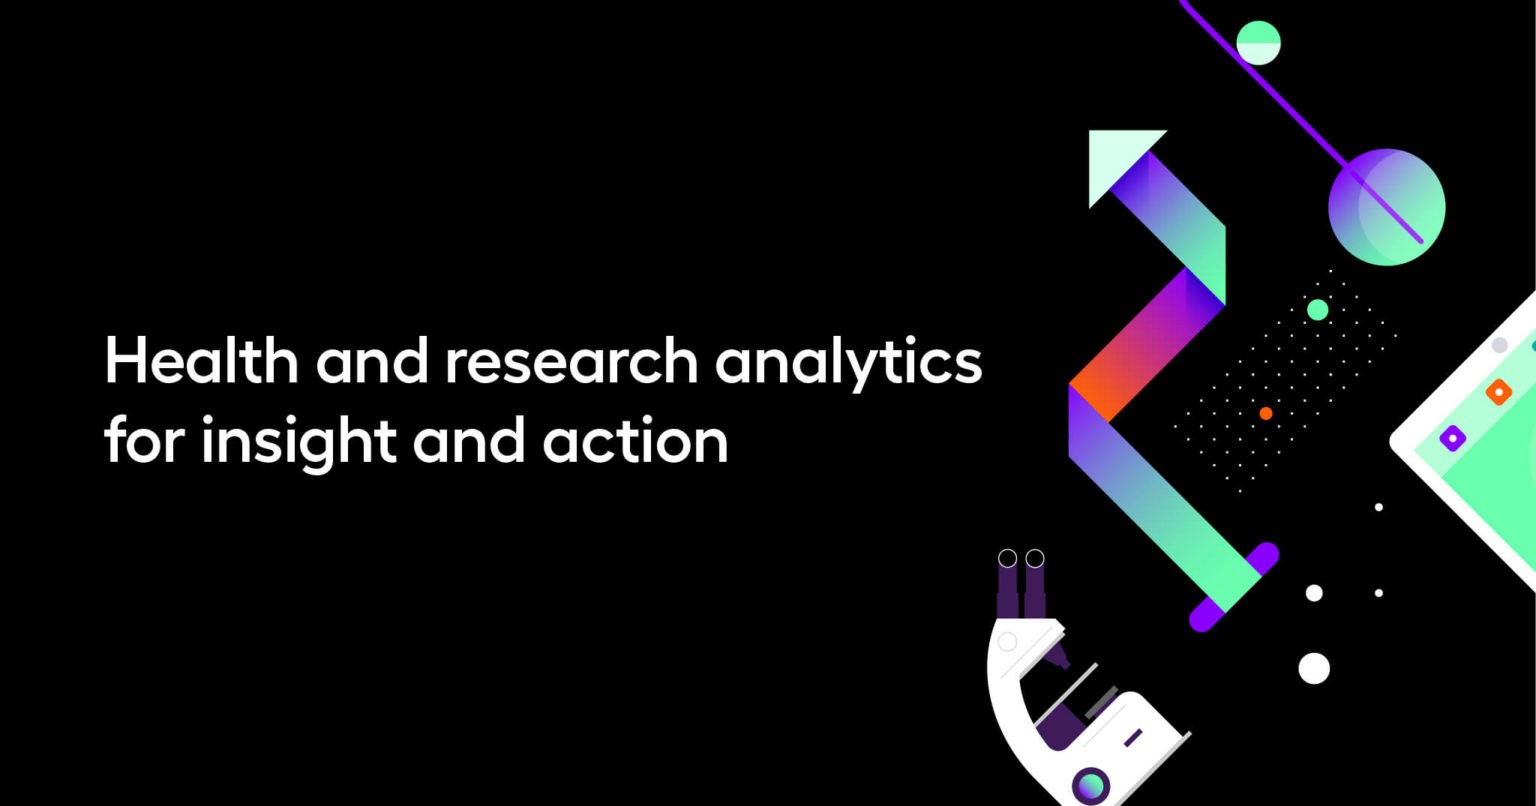 Health and research analytics for insight and action